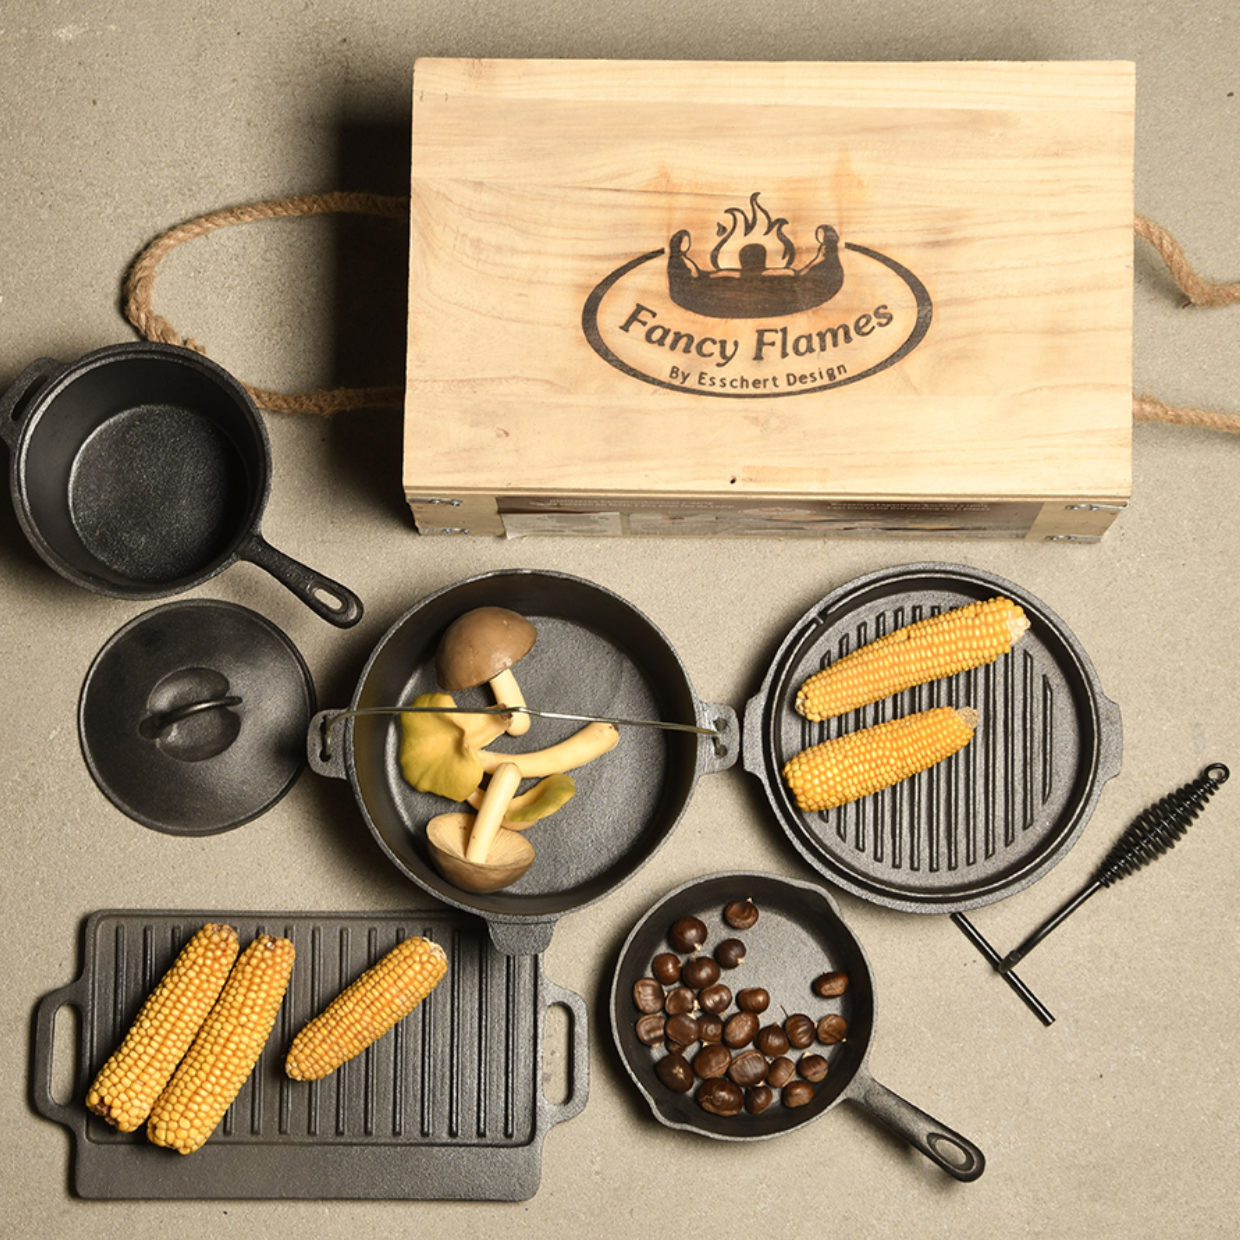 Campfire cooking set 7 pieces Cast iron   - Bushcraft,  Survival, Wilderness skills and Outdoor gear!